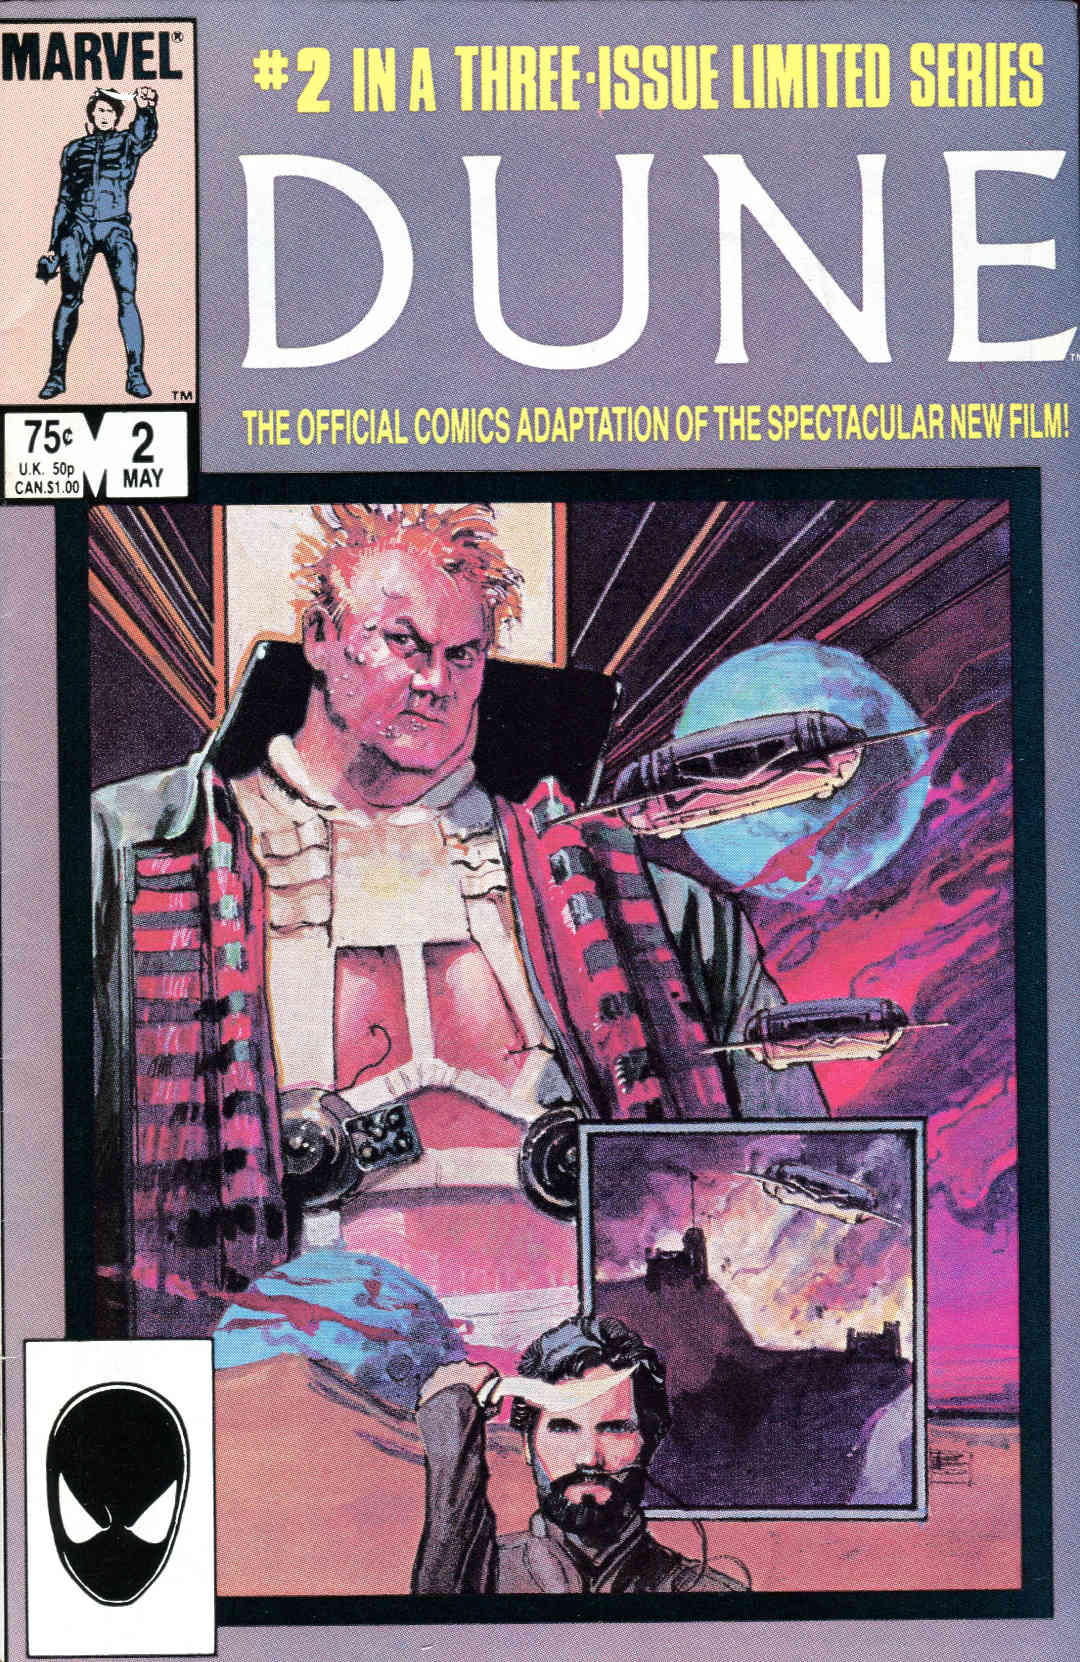 Cover of Marvel Comics 'Dune' #2, illustrated by Bill Sienkiewicz in 1985.